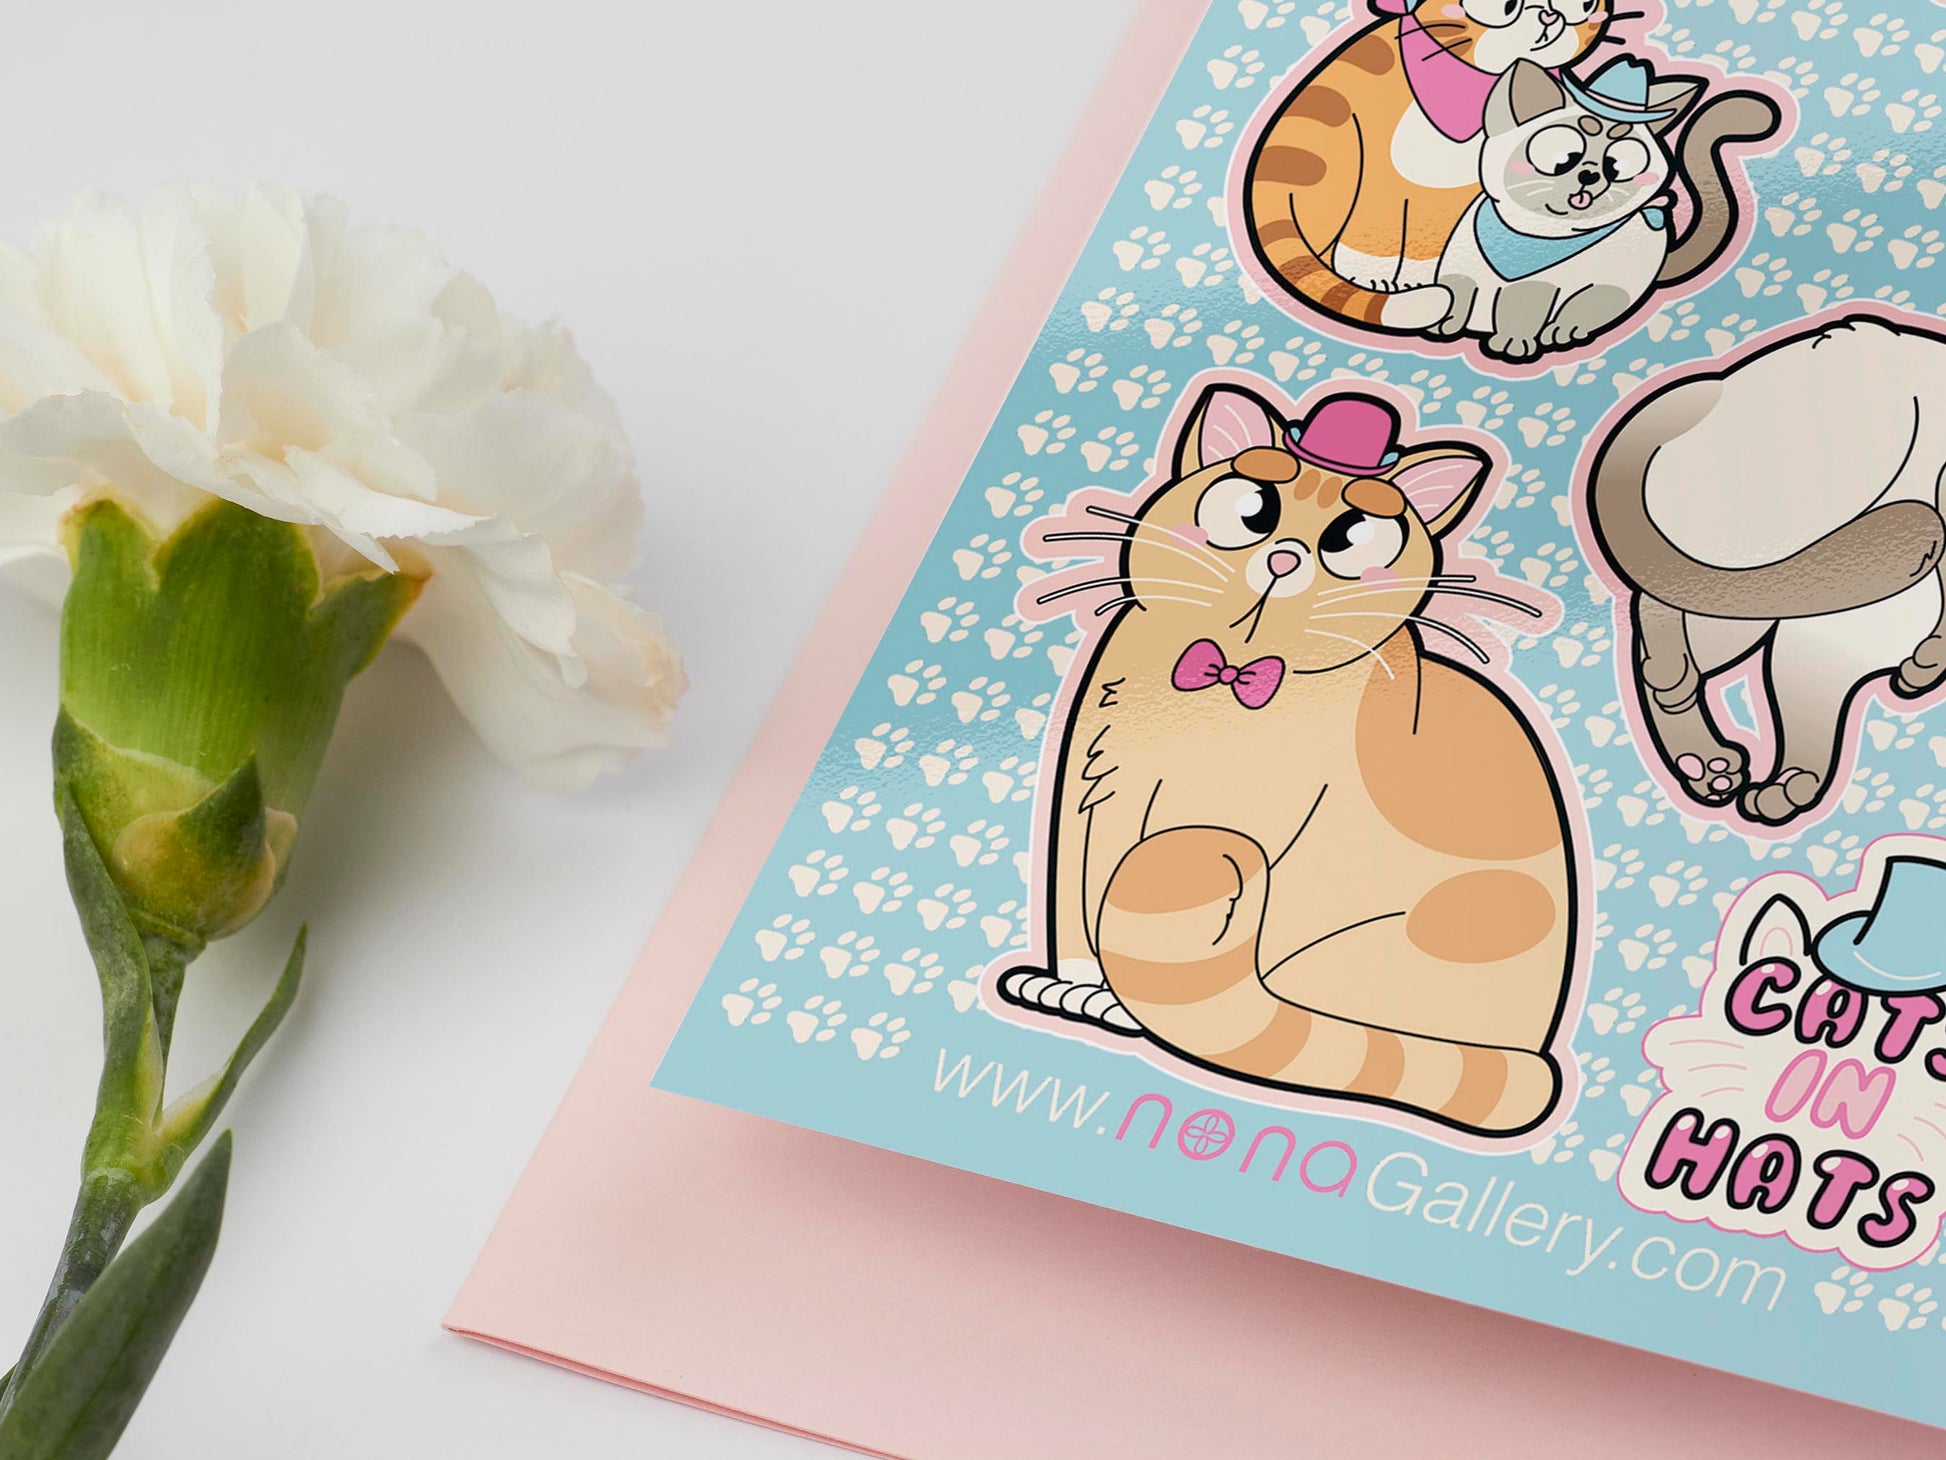 Large sticker sheet of digital illustration cartoons of various cute cats wearing different hats, such as rag dolls, Siamese, grey, ginger, calico and striped cats and kittens